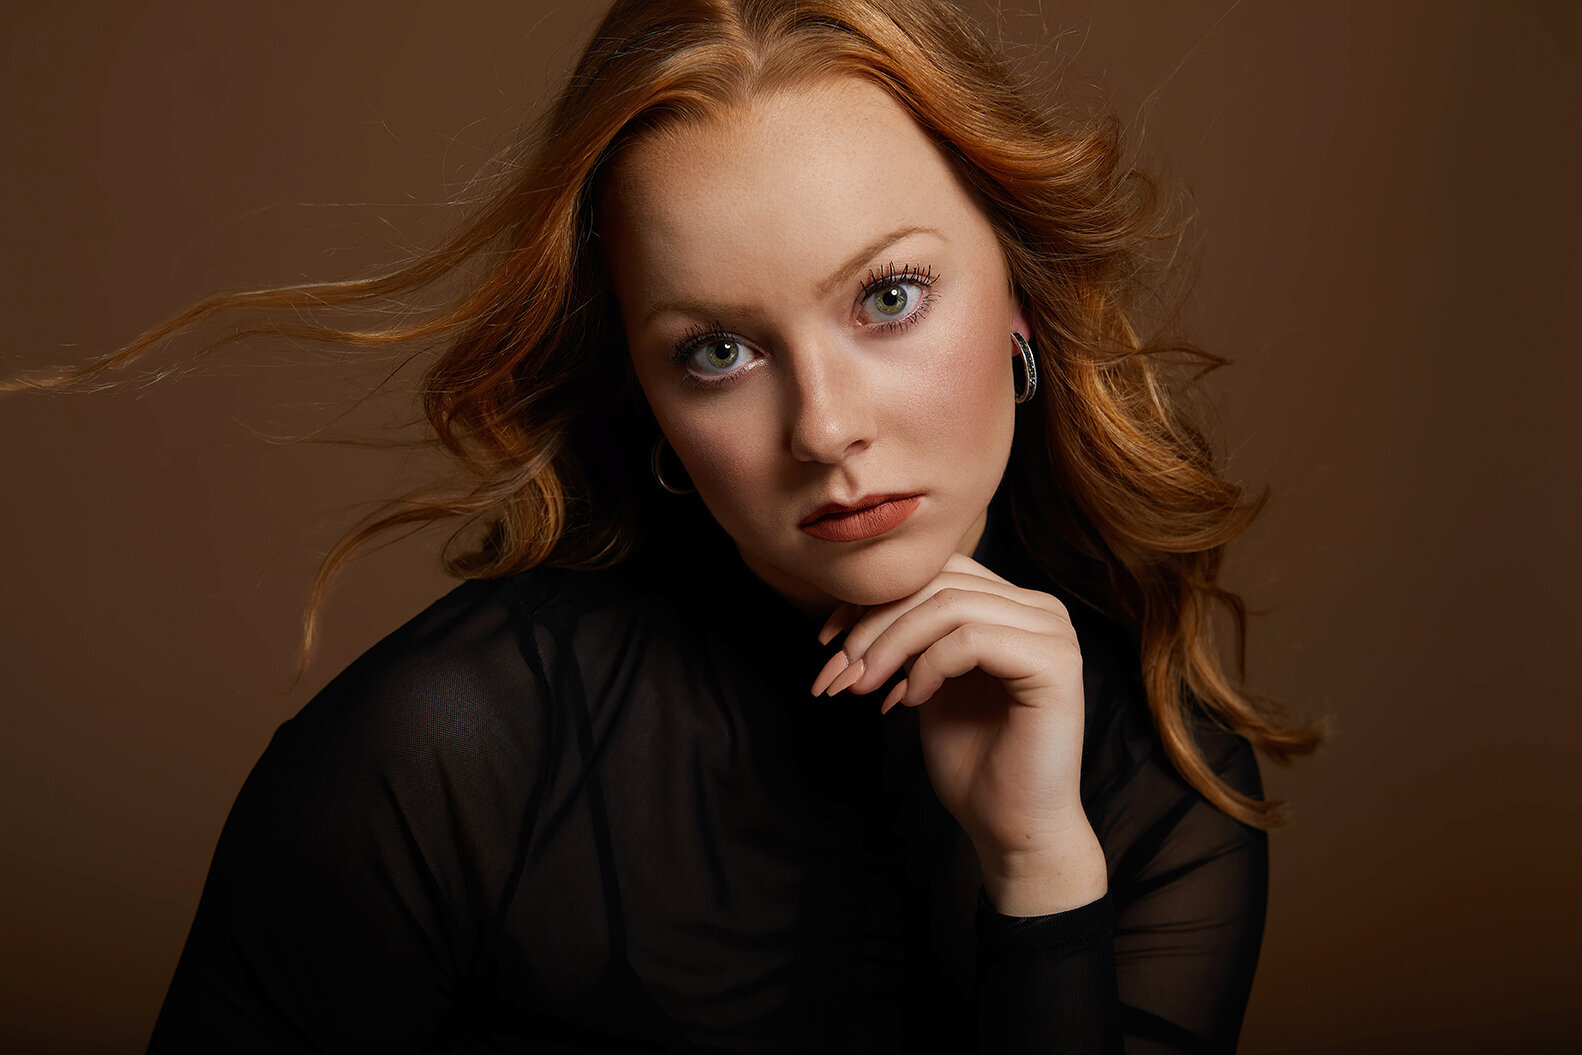 Red haired young woman at Studio 64 Photography posing for headshot with serious expression on brown backdrop.